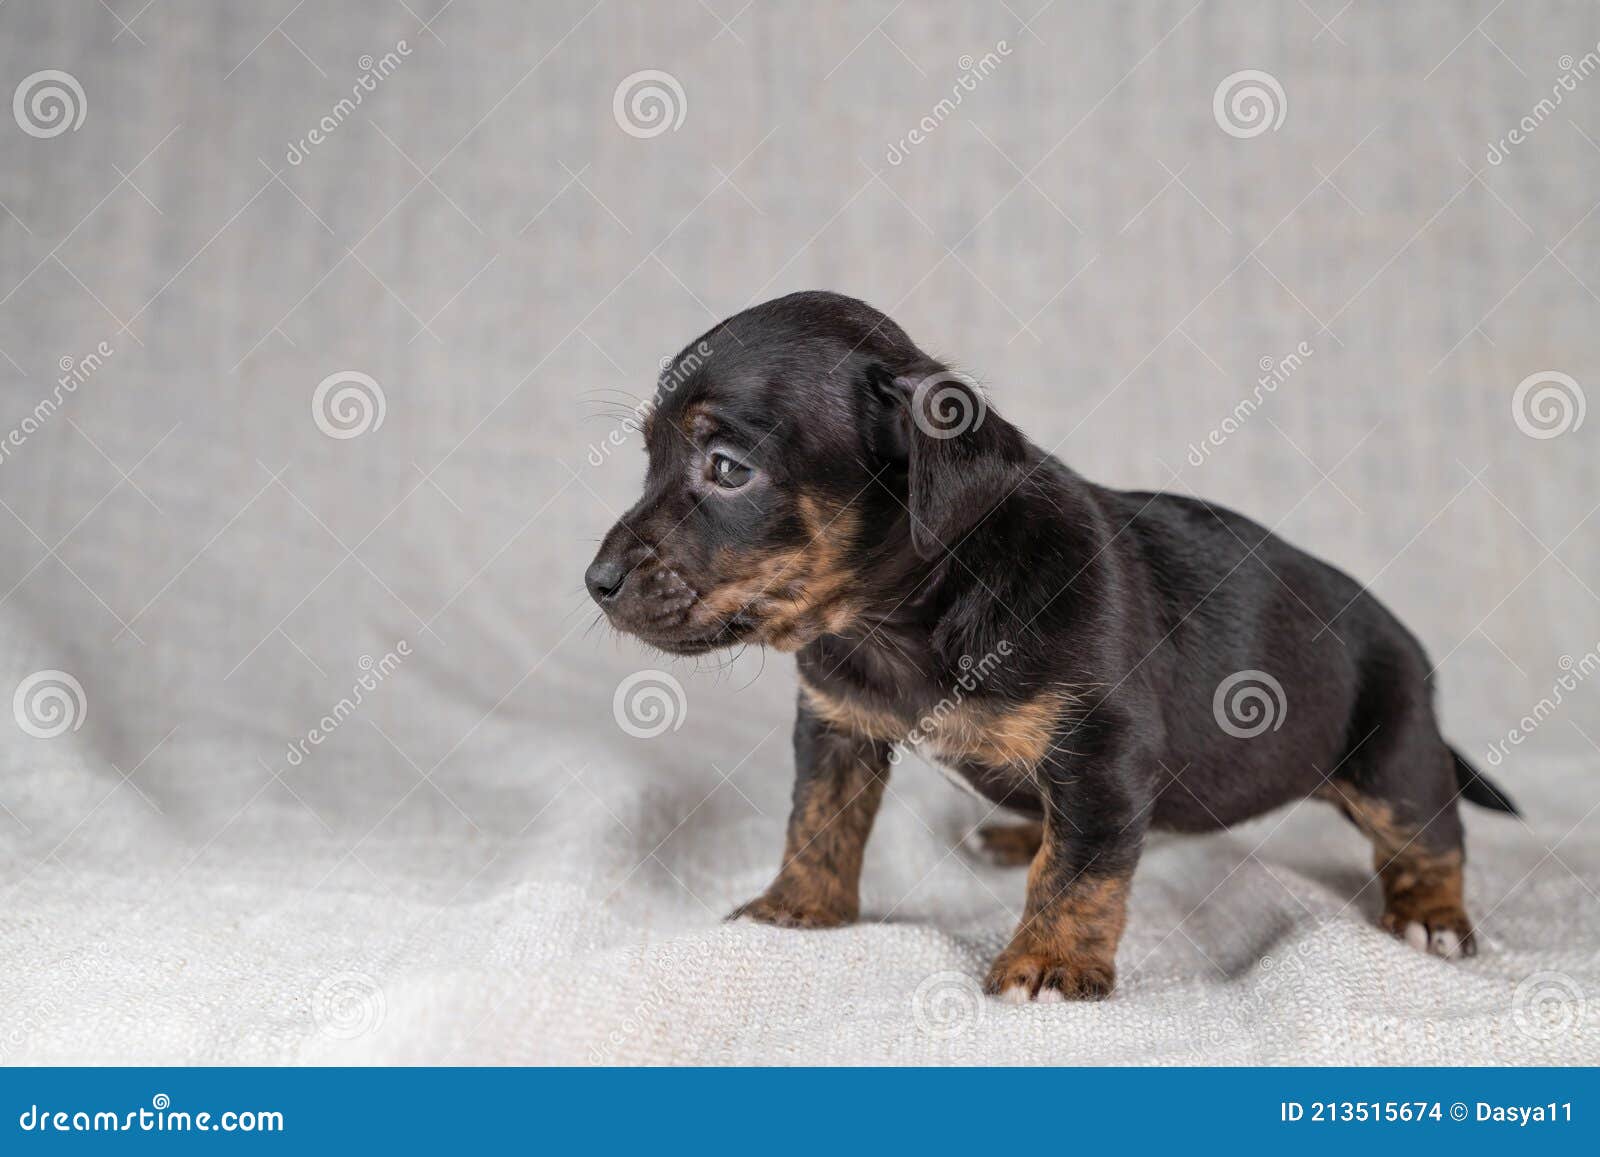 Brown with Black Jack Russell Terrier Dog Puppy. is Looking Curiously, Seen  from the Side. Cream Colored Background Stock Photo - Image of little,  terrier: 213515674